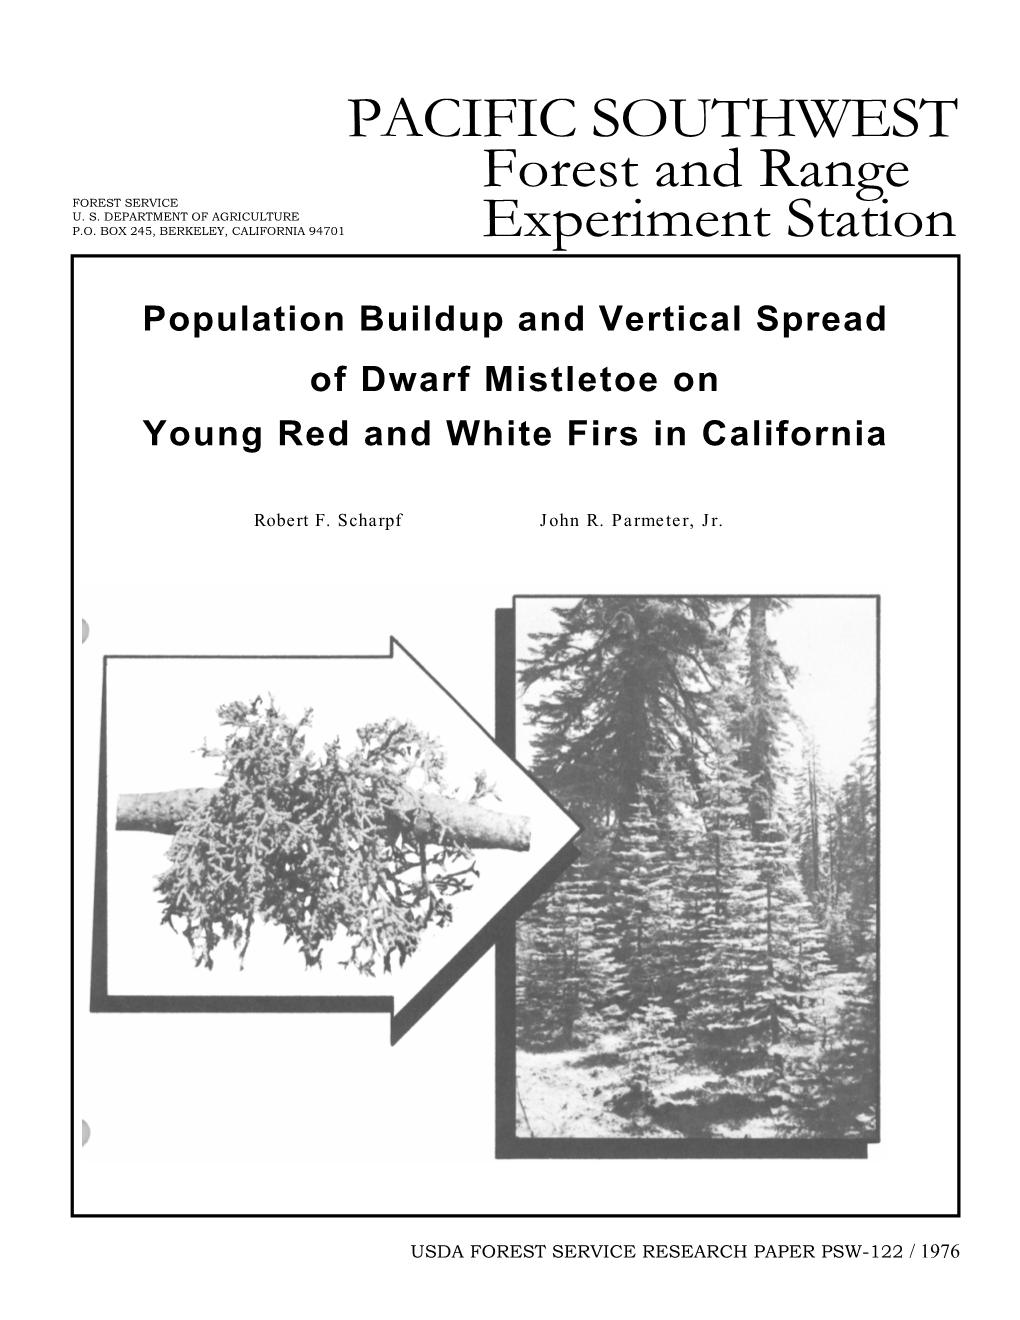 Population Buildup and Vertical Spread of Dwarf Mistletoe on Young Red and White Firs in California. USDA Forest Serv